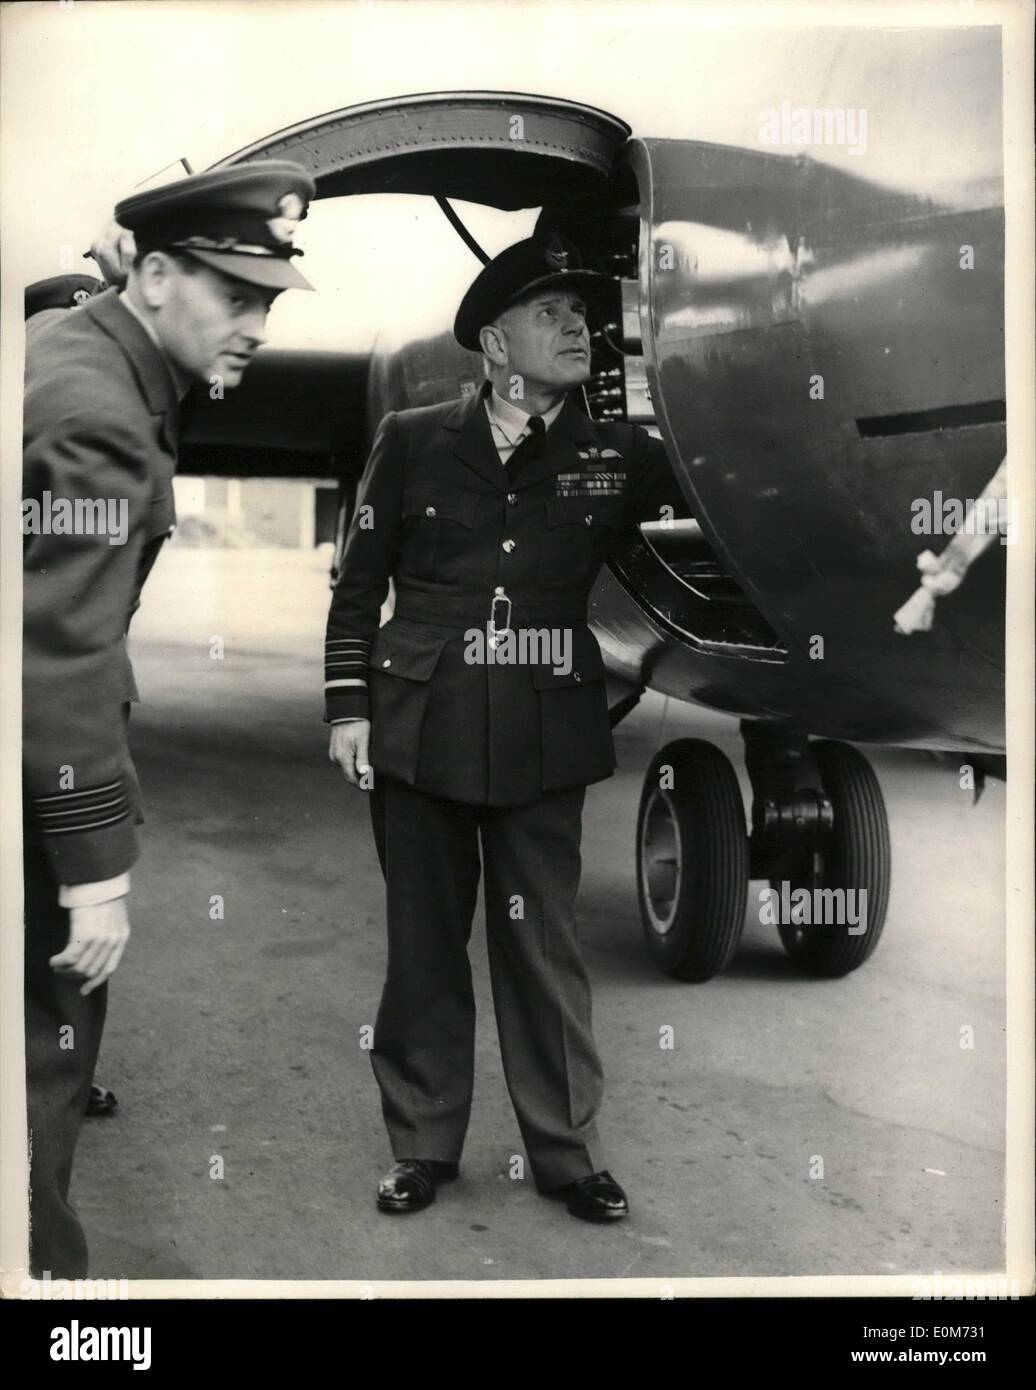 Sep. 29, 1953 - 29-9-53 Chief of Air Staff visits Canberra Team. Competing in the England-New Zealand Air Race Air Chief Marshal Sir William F. Dickson, Chief of the Air Staff, today paid a visit to the R.A.F. Station Wyton to inspect the R.A.F. Canberra team competing in the England-New Zealand Air Race, which commences on October 8th. The team of three Canberras commanded by Wing Commander L.M. Hodges, D.S.O., D.F.C., has now completed its training, having made 19 proving flights along the initial three staging posts of the rout. Photo Shows: Air Chief Marshal Sir William F Stock Photo